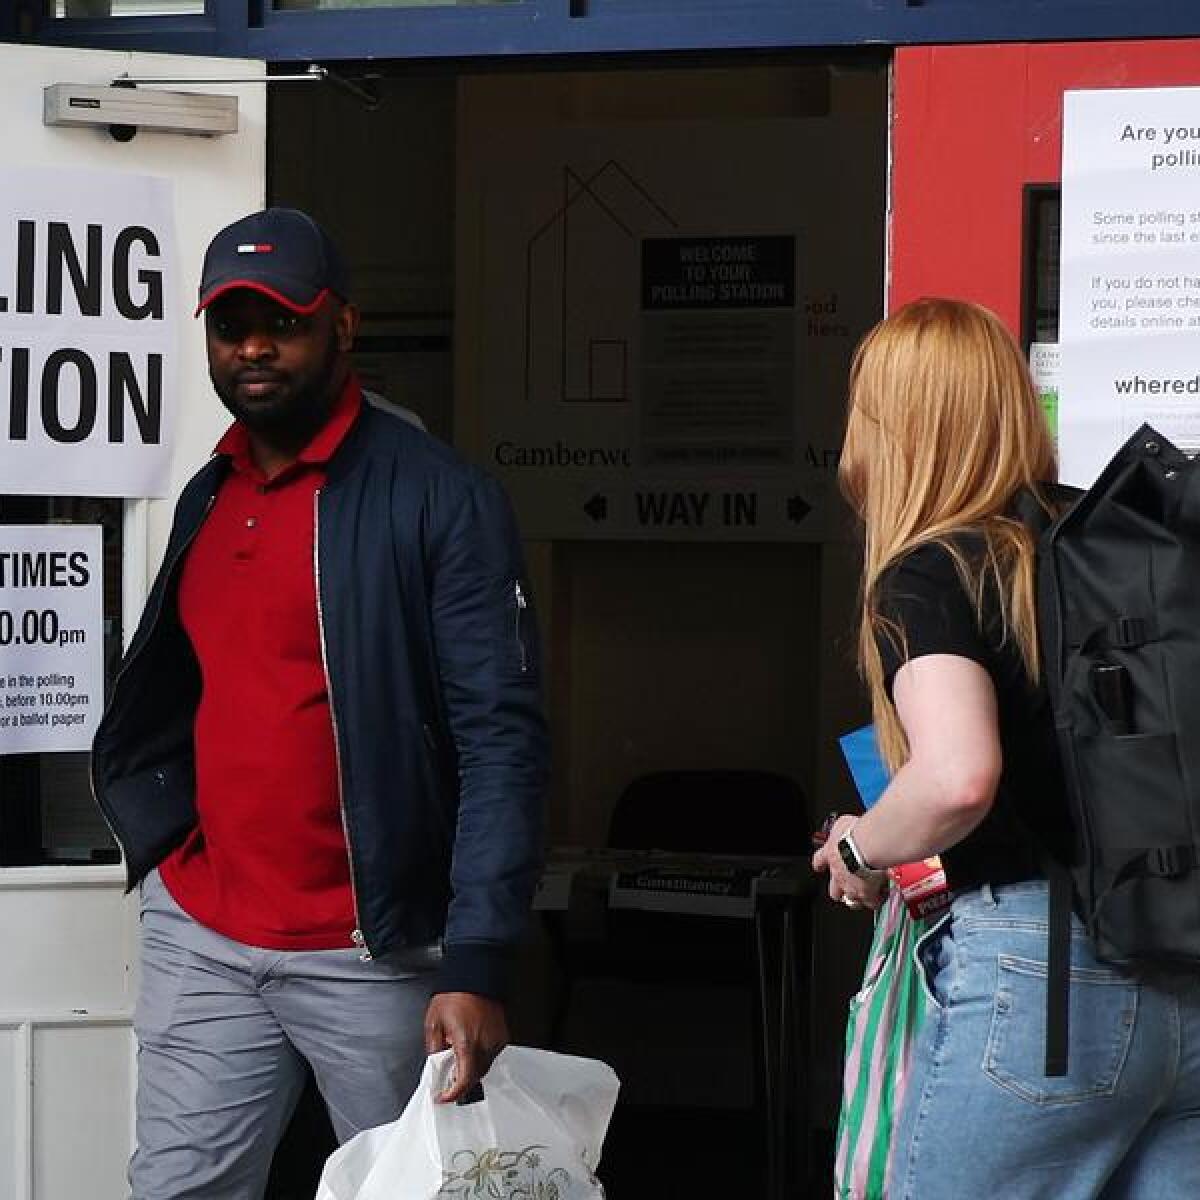 Voters exit a polling station in London